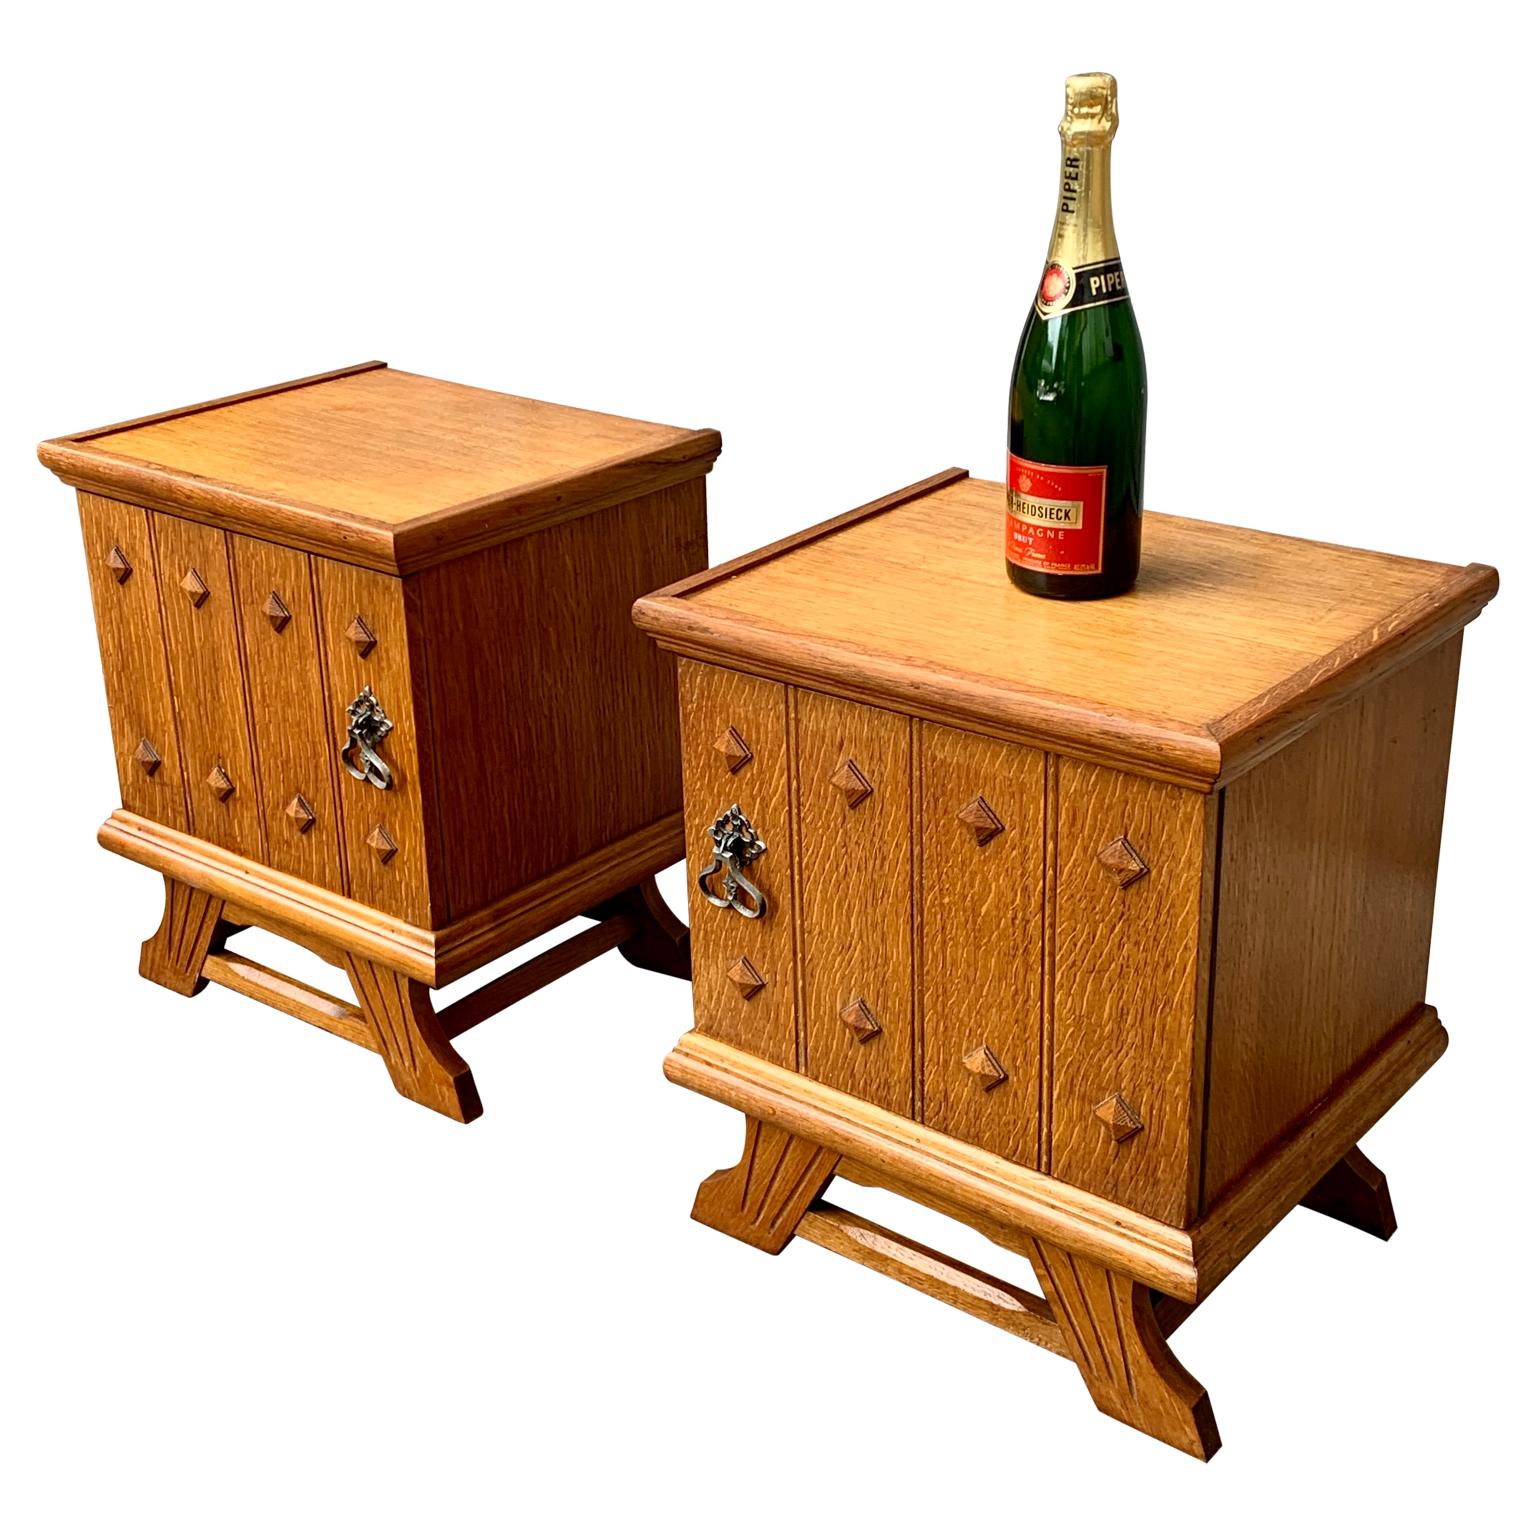 A charming pair of French Brutalist nightstands or small night tables in oak wood with original hardware from the middle of the 20th Century.
This mid-century set is an honest pair, meaning that the set has left and right facing doors towards the